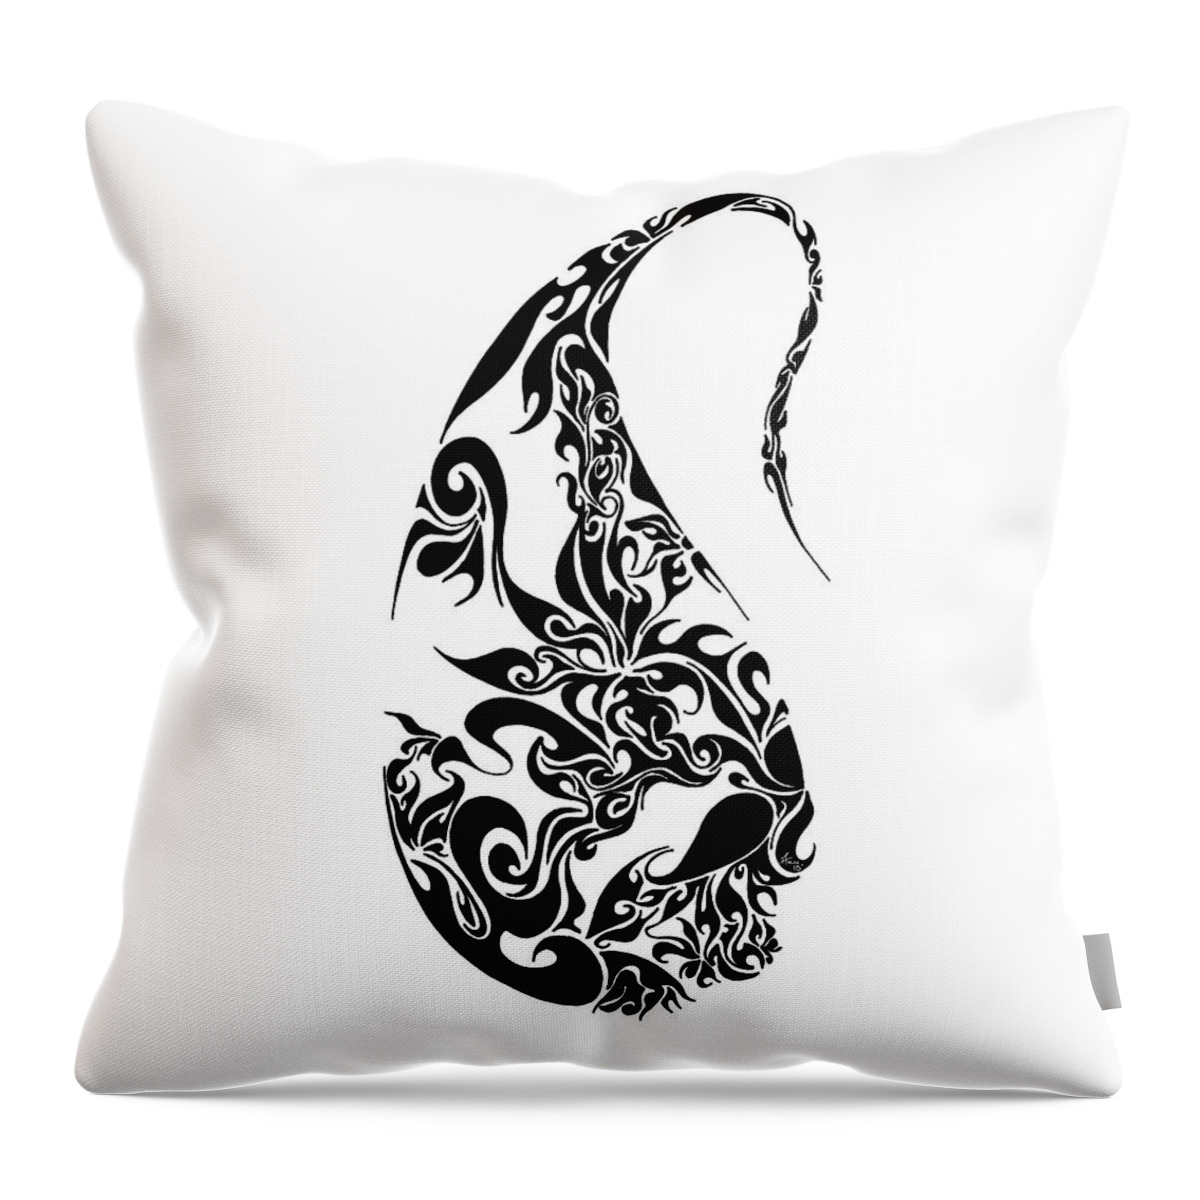 Doodle Throw Pillow featuring the drawing The Seed by Anushree Santhosh